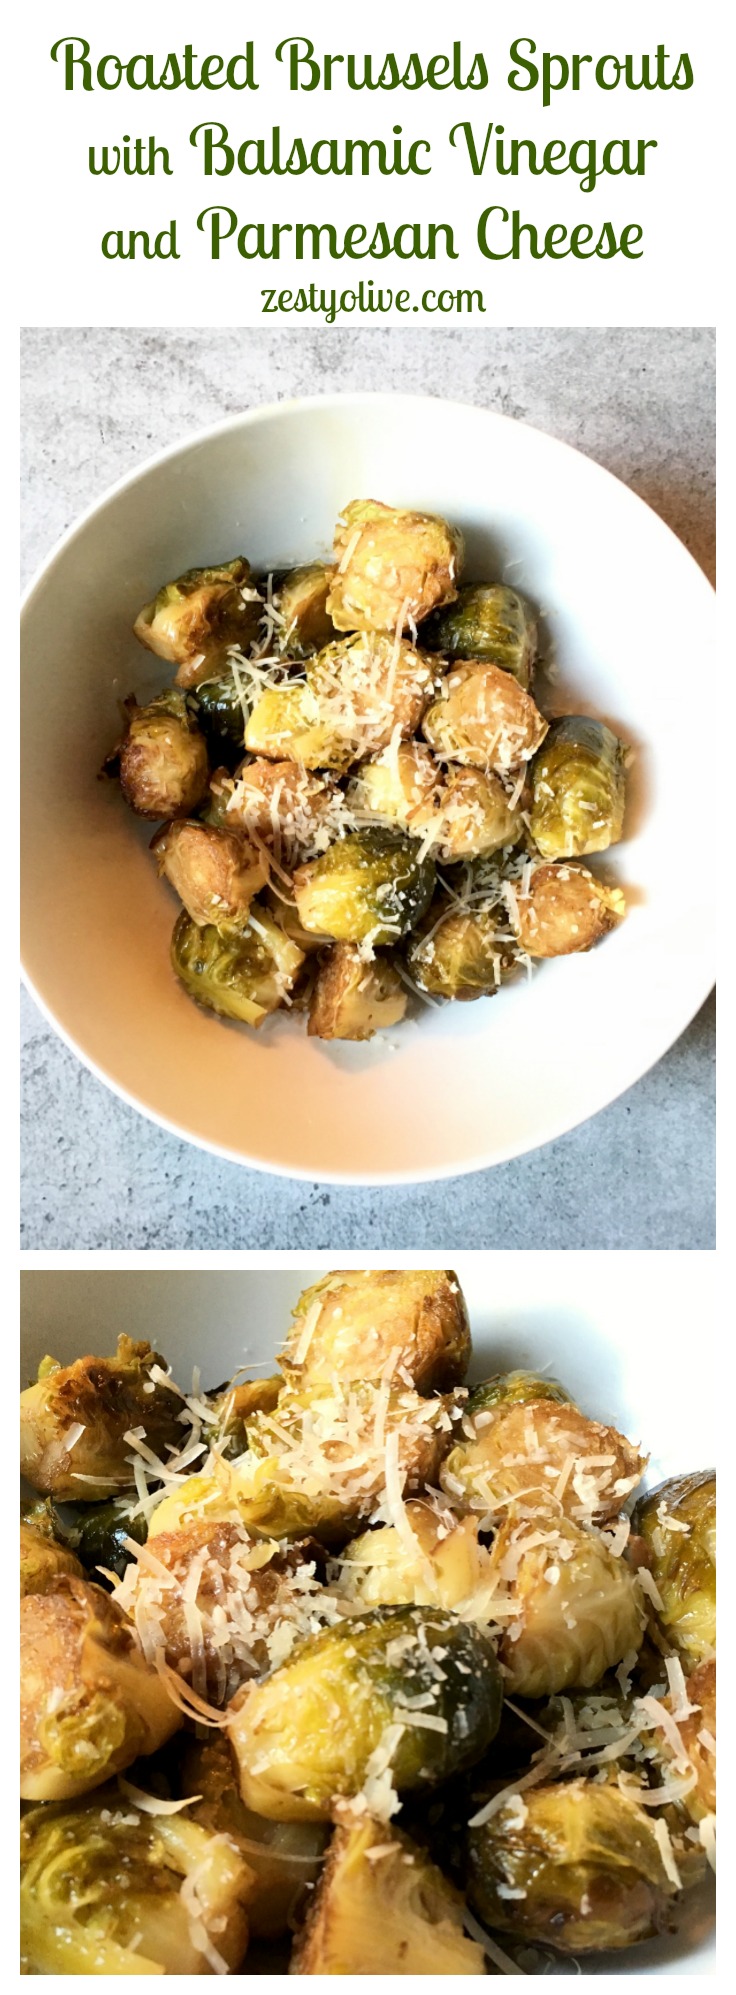 Roasted Brussels Sprouts with Balsamic Vinegar and Parmesan Cheese